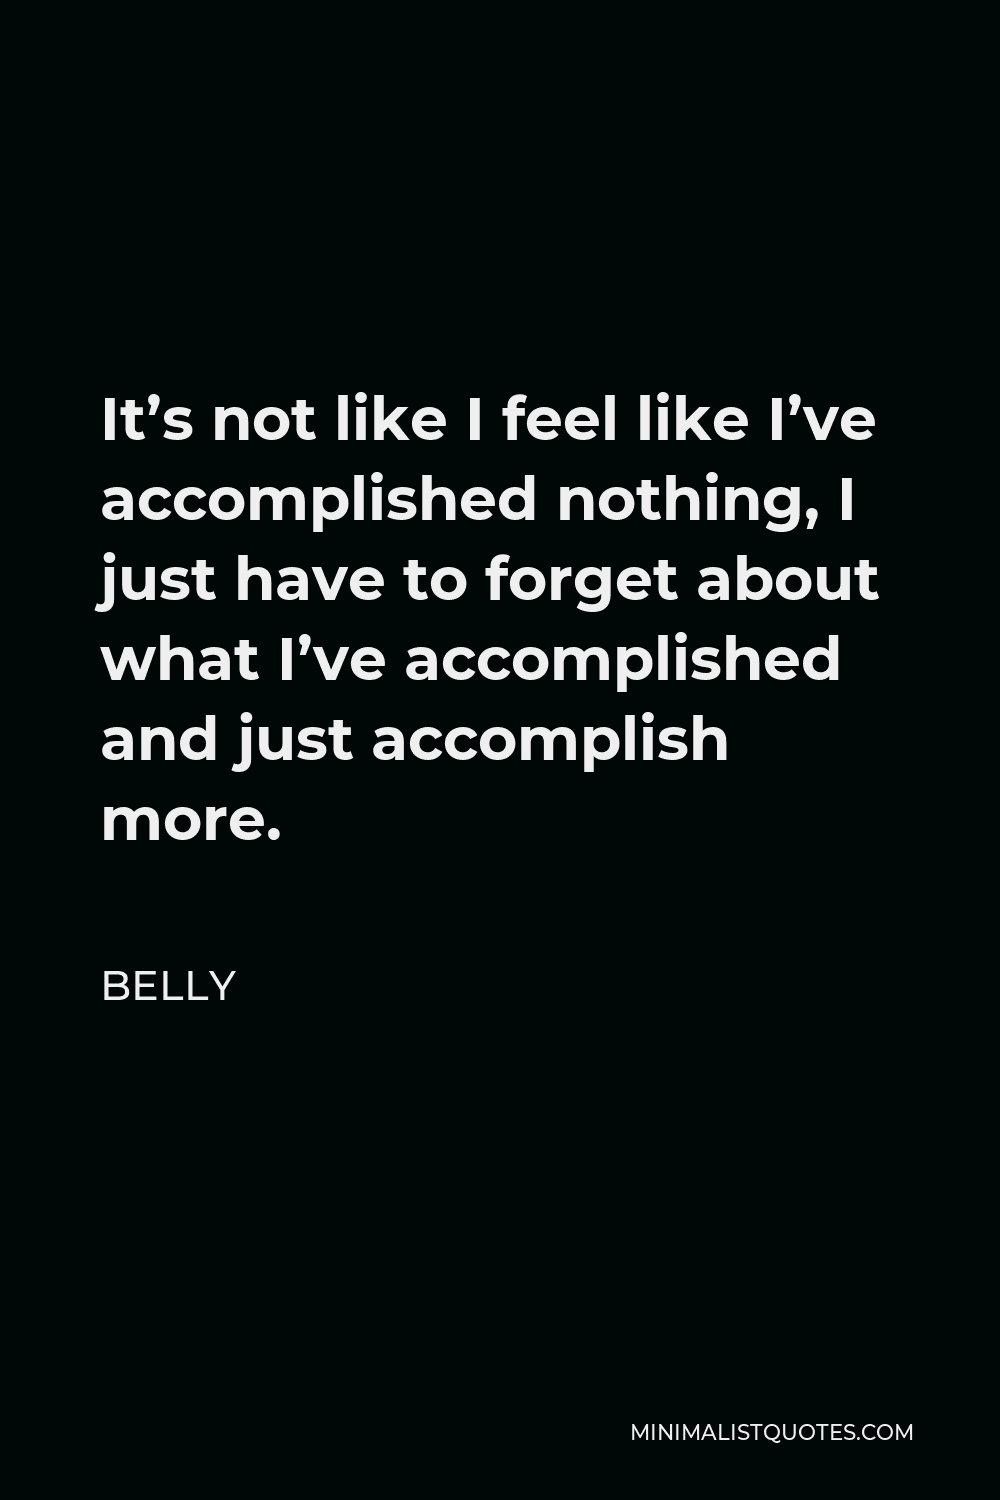 Belly Quote - It’s not like I feel like I’ve accomplished nothing, I just have to forget about what I’ve accomplished and just accomplish more.